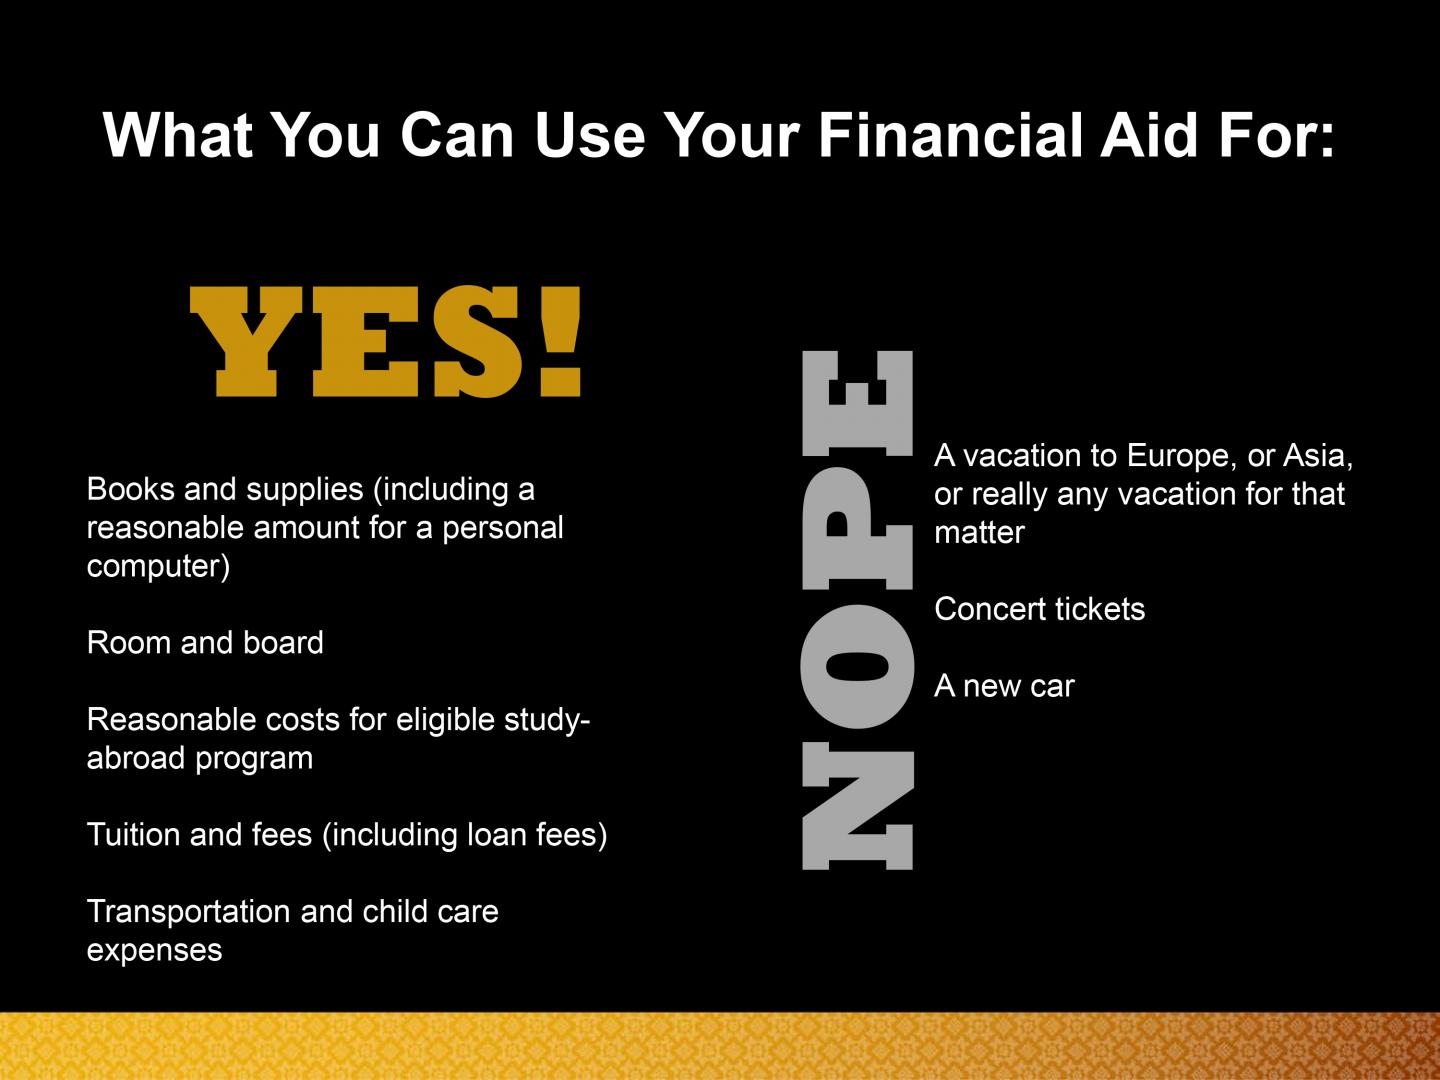 What You Can Use Your Financial Aid For